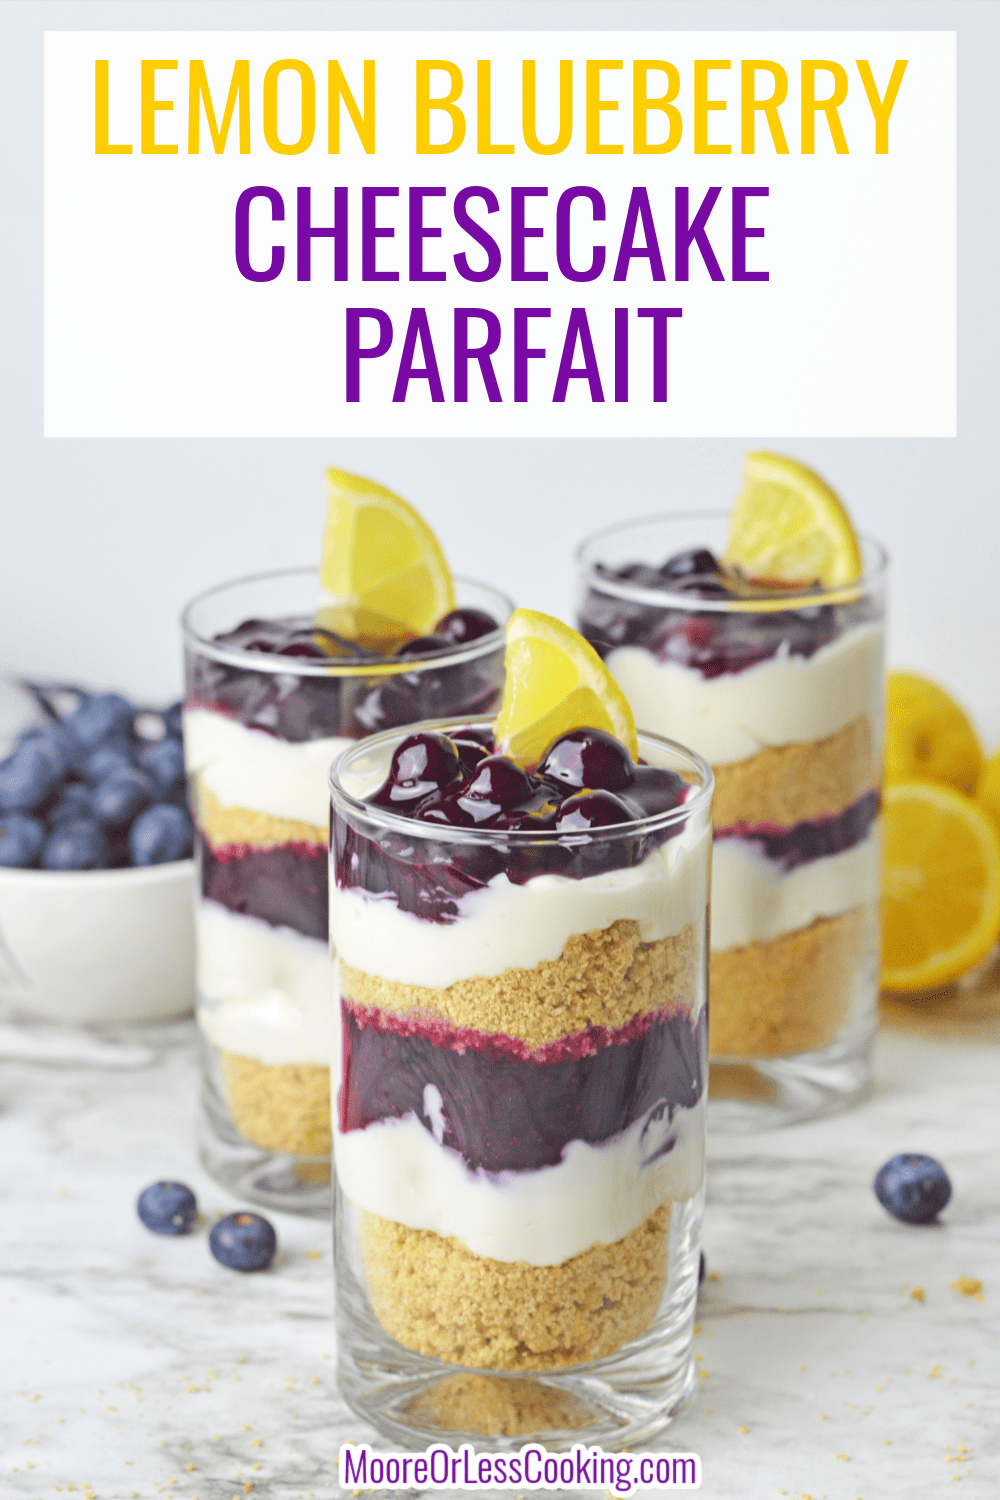 This Lemon Blueberry Cheesecake Parfait is an easy no-bake summer dessert that's always a hit. It has all the flavors of cheesecake including buttery graham cracker layers to separate the sweetened lemon cream cheese mixture that's topped with an easy homemade blueberry sauce and garnished with lemon. via @Mooreorlesscook